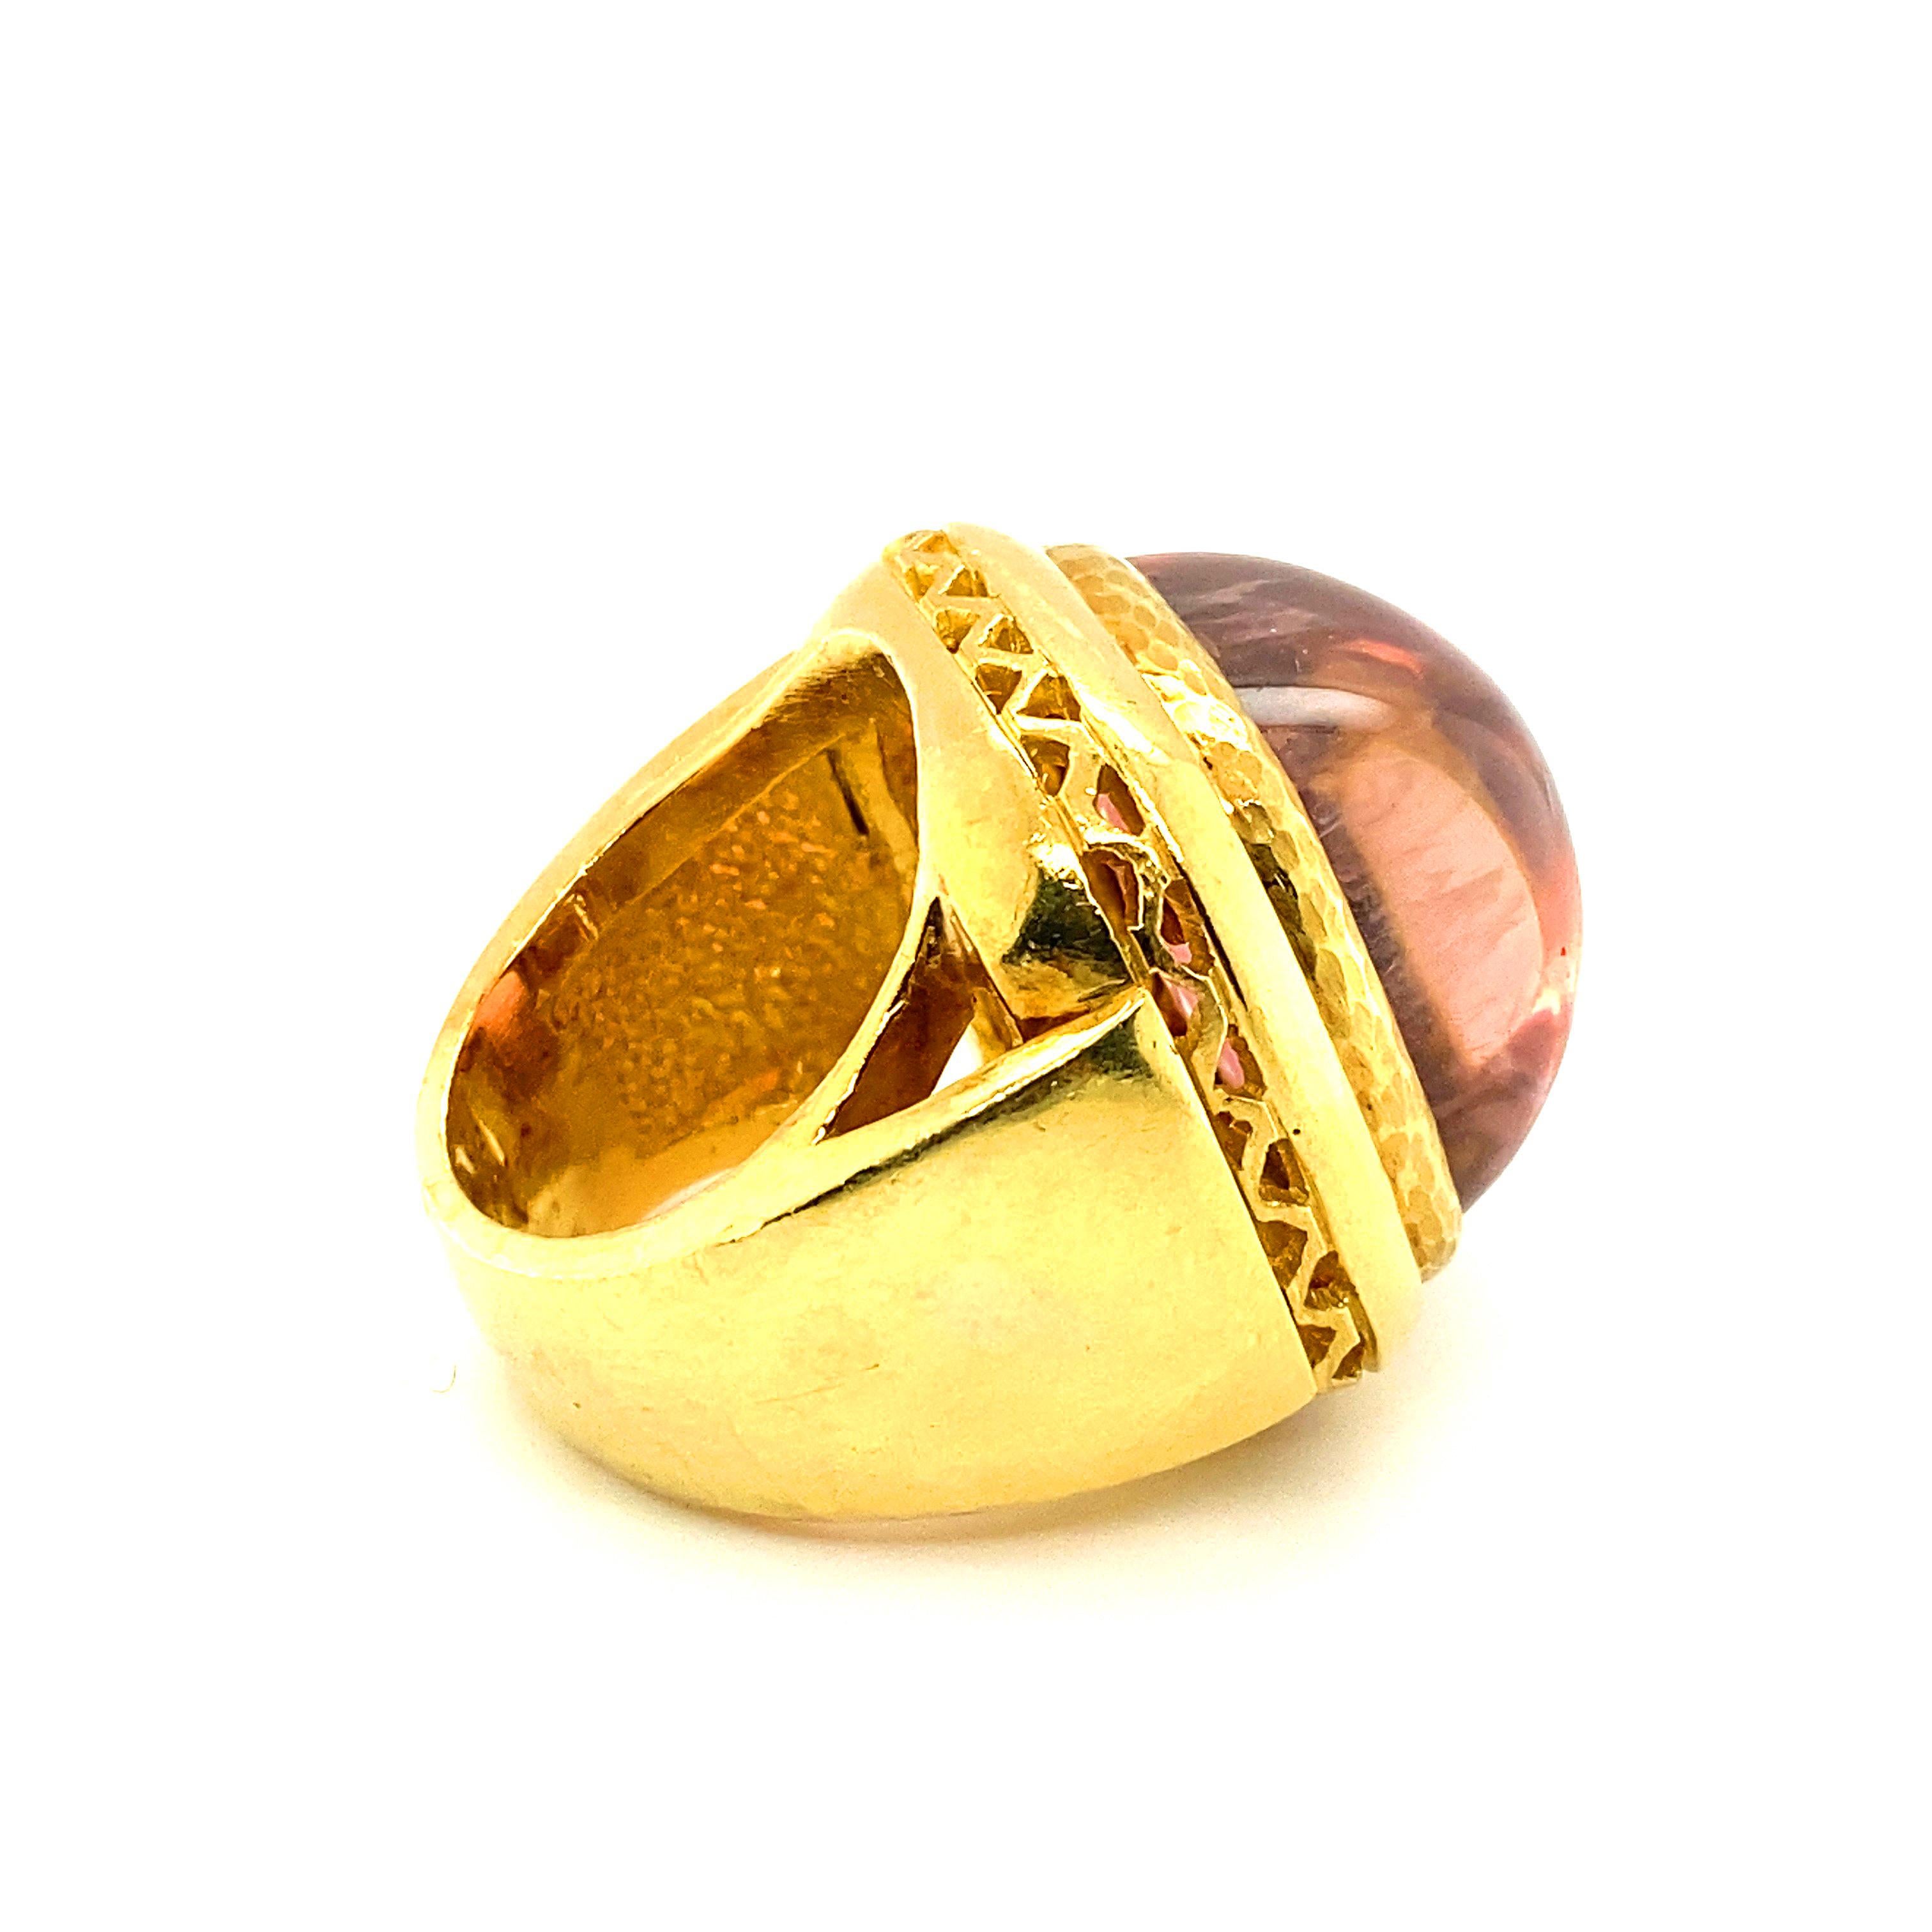 A cocktail ring designed around a brilliant cabochon pink tourmaline of approximately 34cts.  The stone displays a deep, brilliant pink when viewed straight on, and picks up a peach undertone when viewed from the side.  The stone has a pinker hue